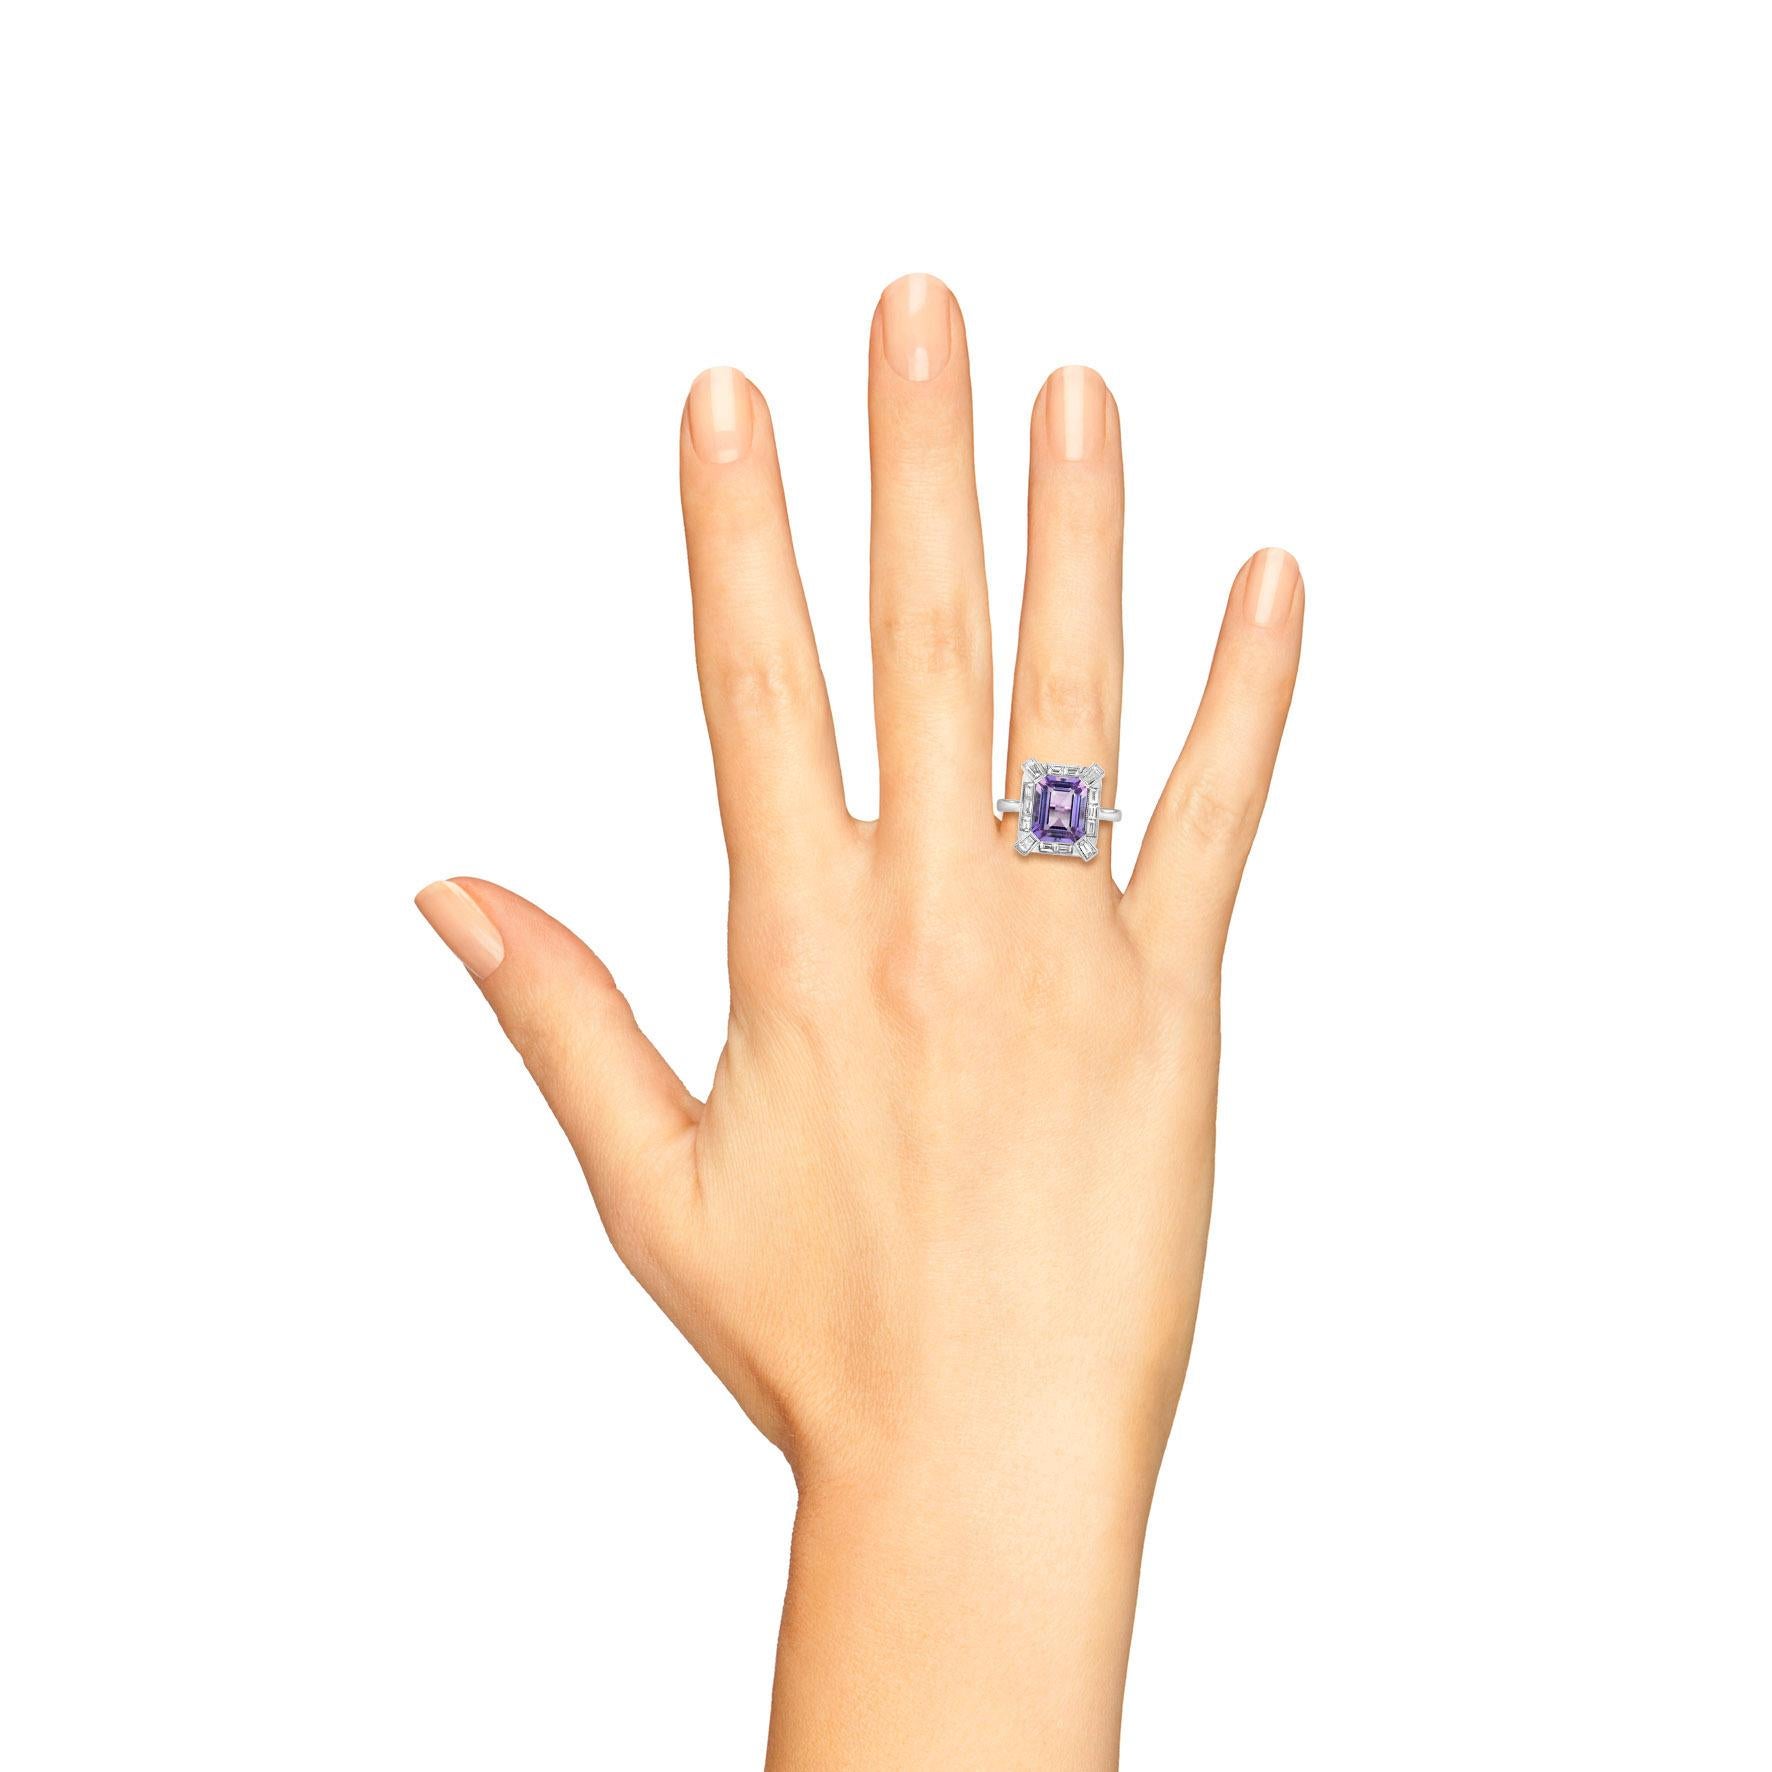 This beautiful Art Deco style amethyst ring is centered with an emerald cut pink amethyst. Glittering and white in both baguettes and round brilliant diamonds, the white gold setting provides a lifetime of elegant utility. Adorn yourself with this